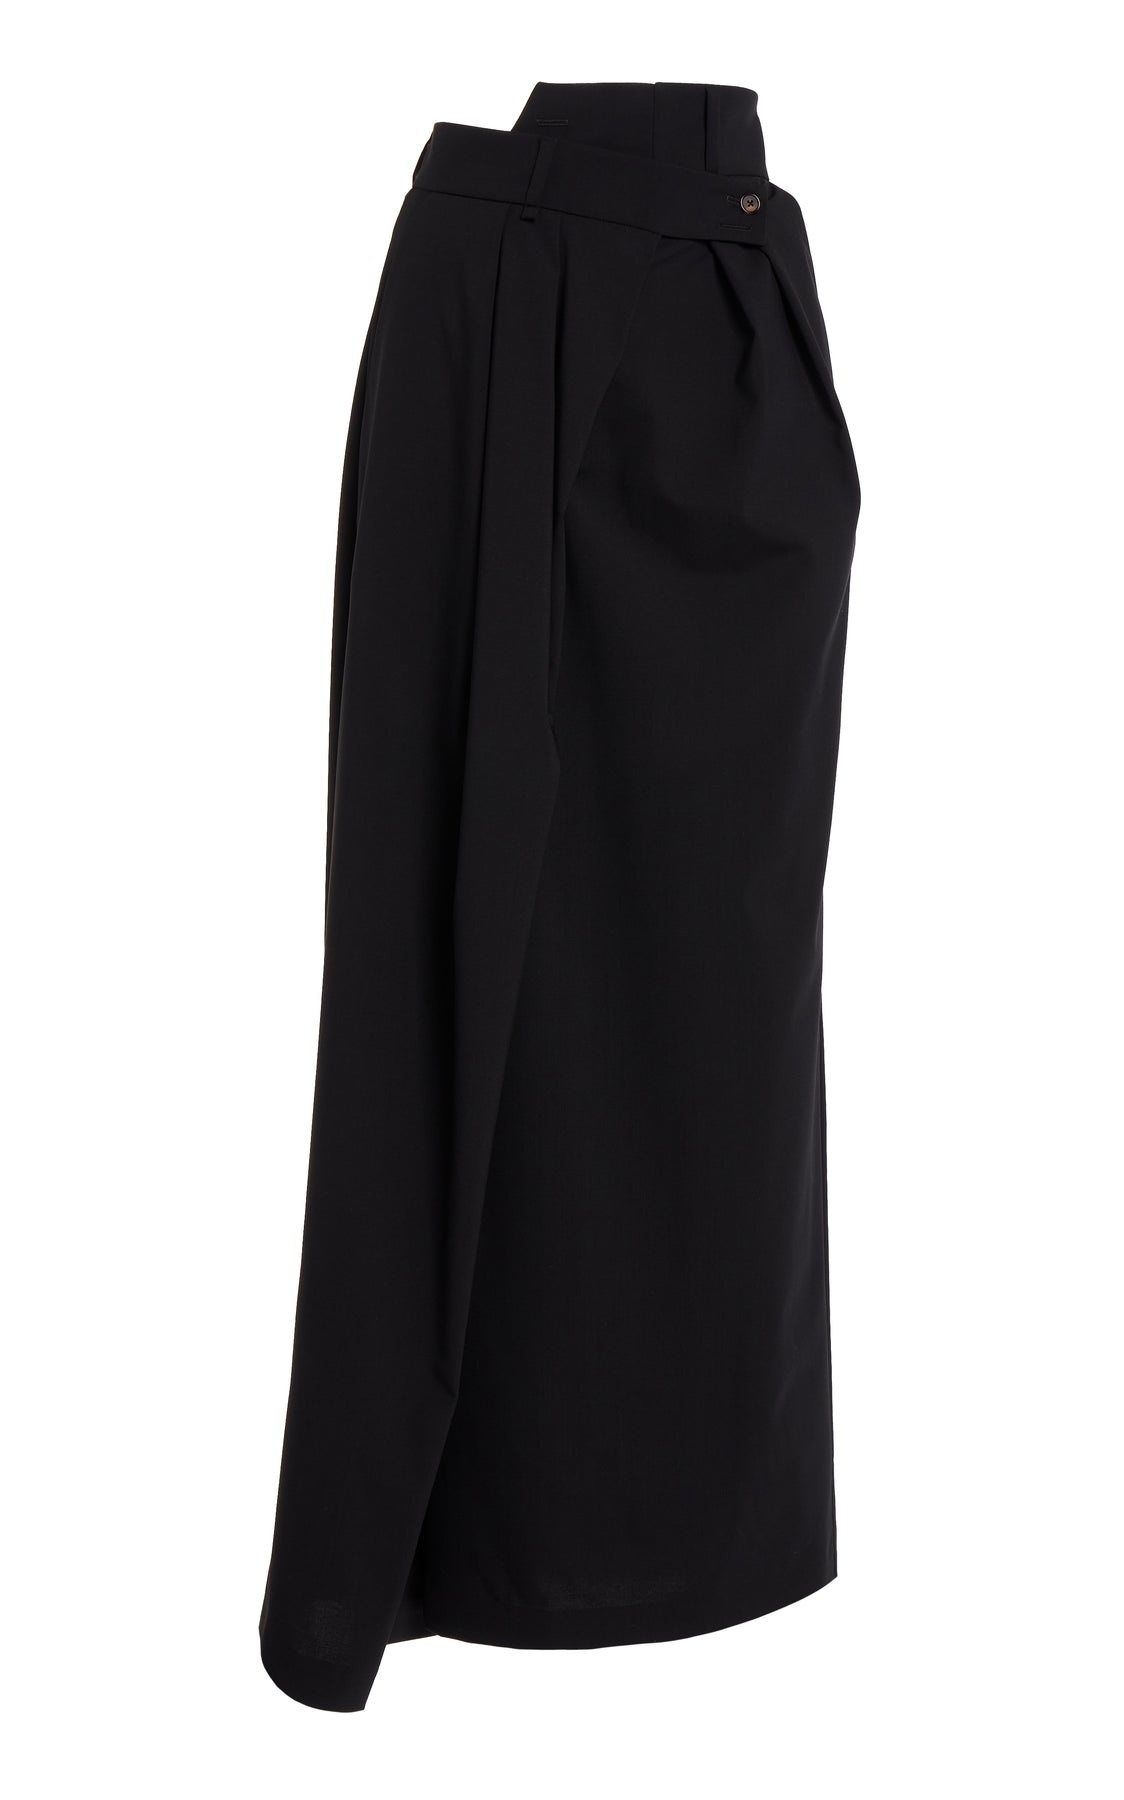 DECONSTRUCTED TROUSERS SKIRT BLACK - 1